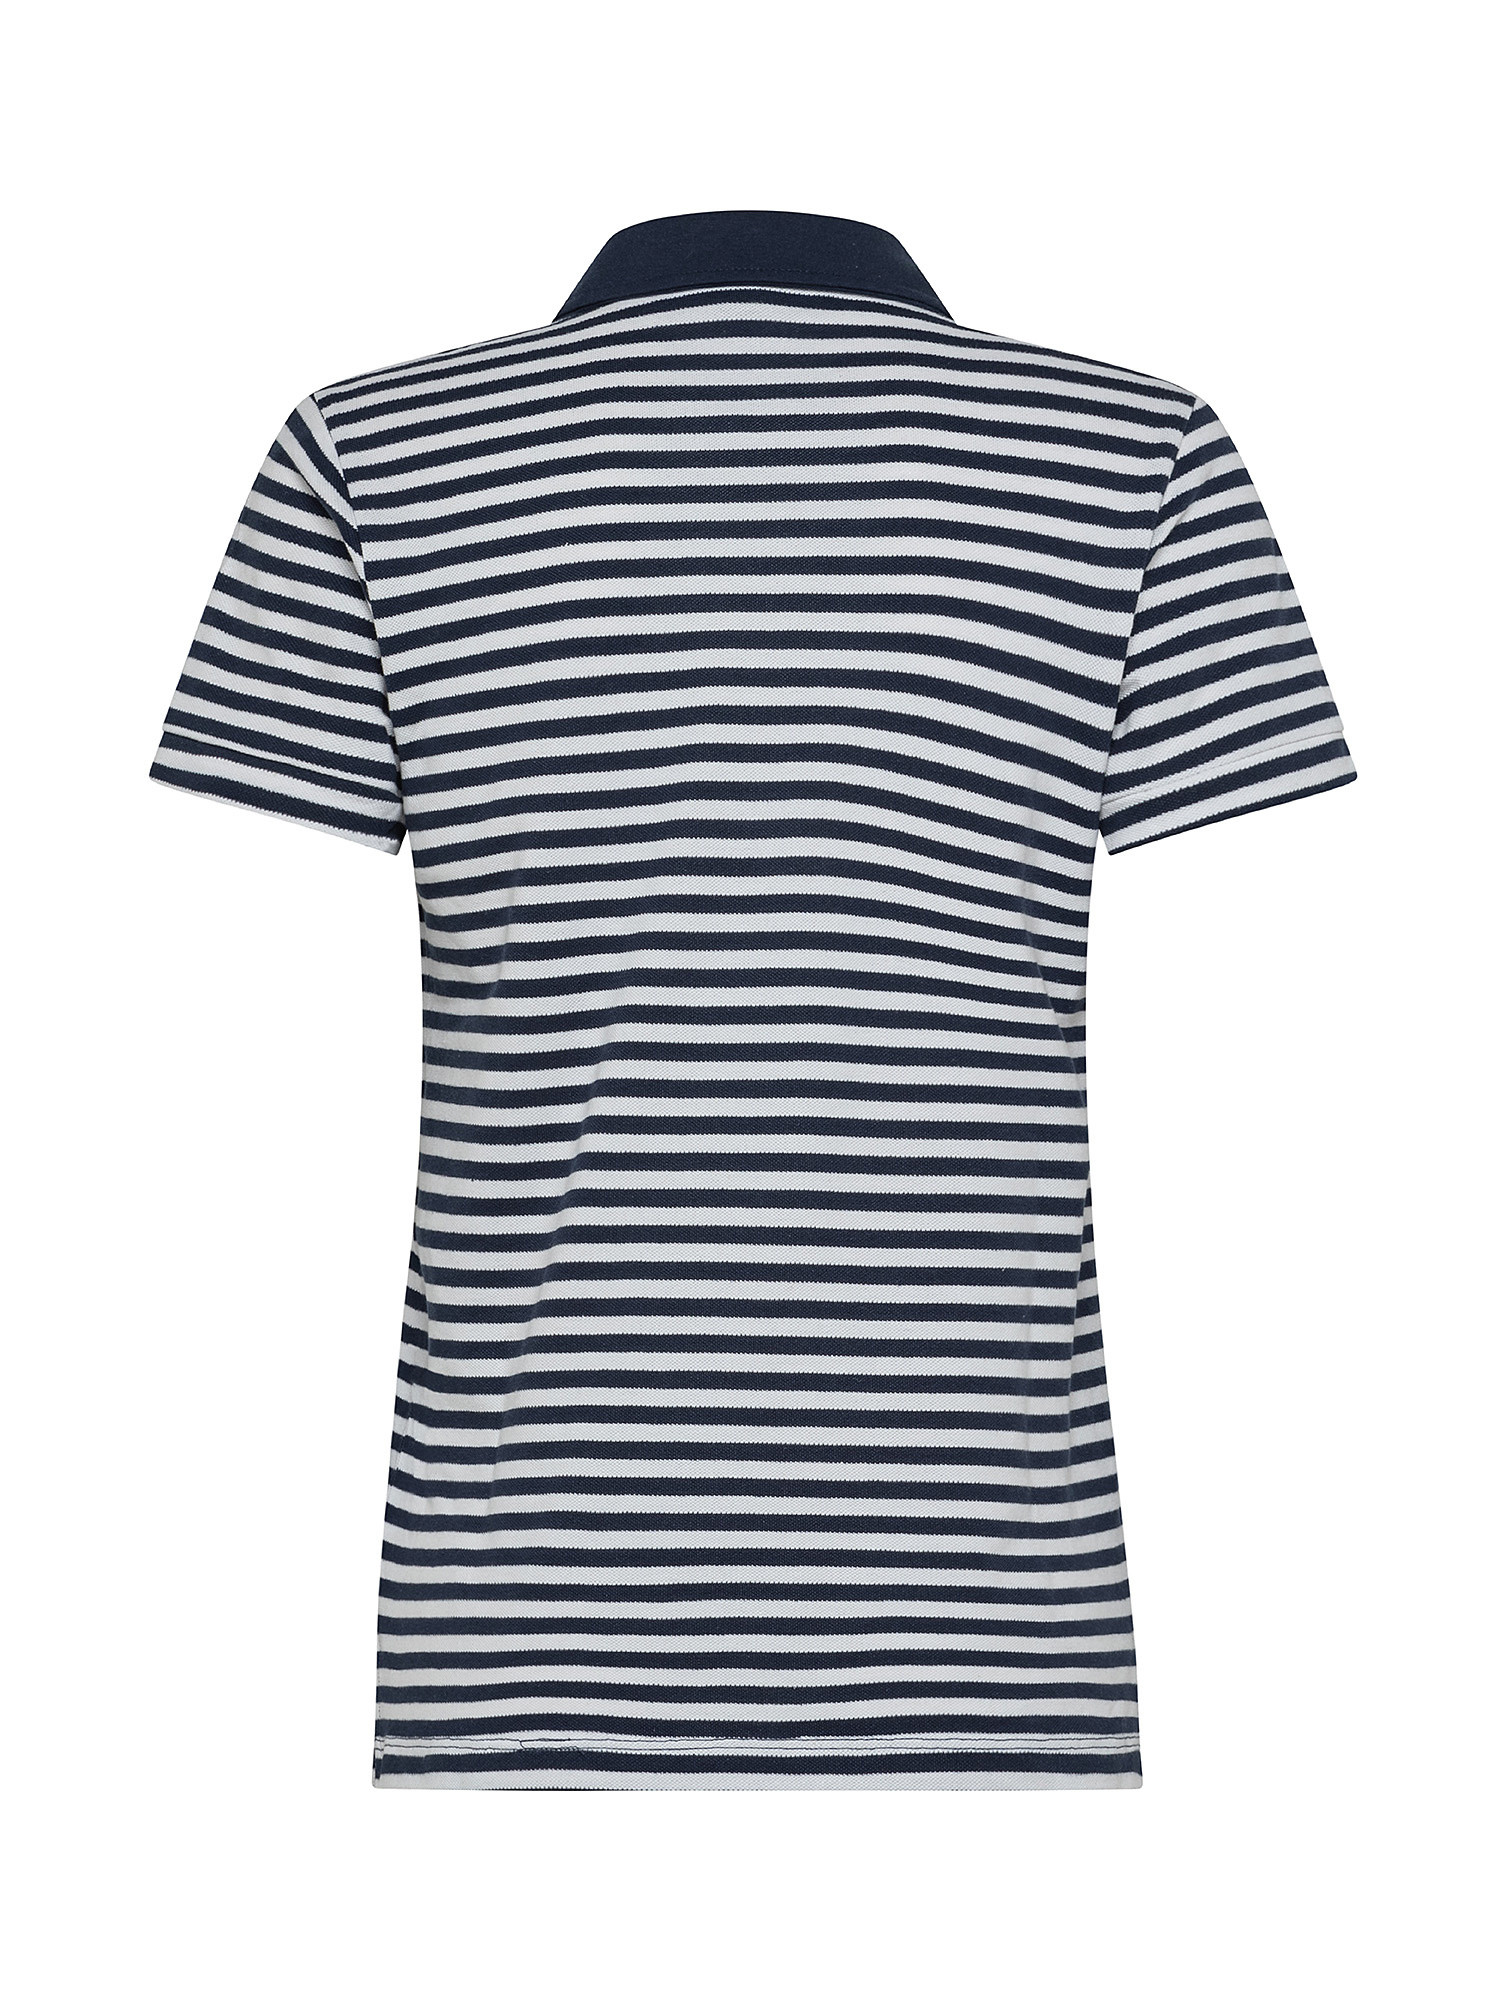 Striped polo shirt with rouches, Dark Blue, large image number 1